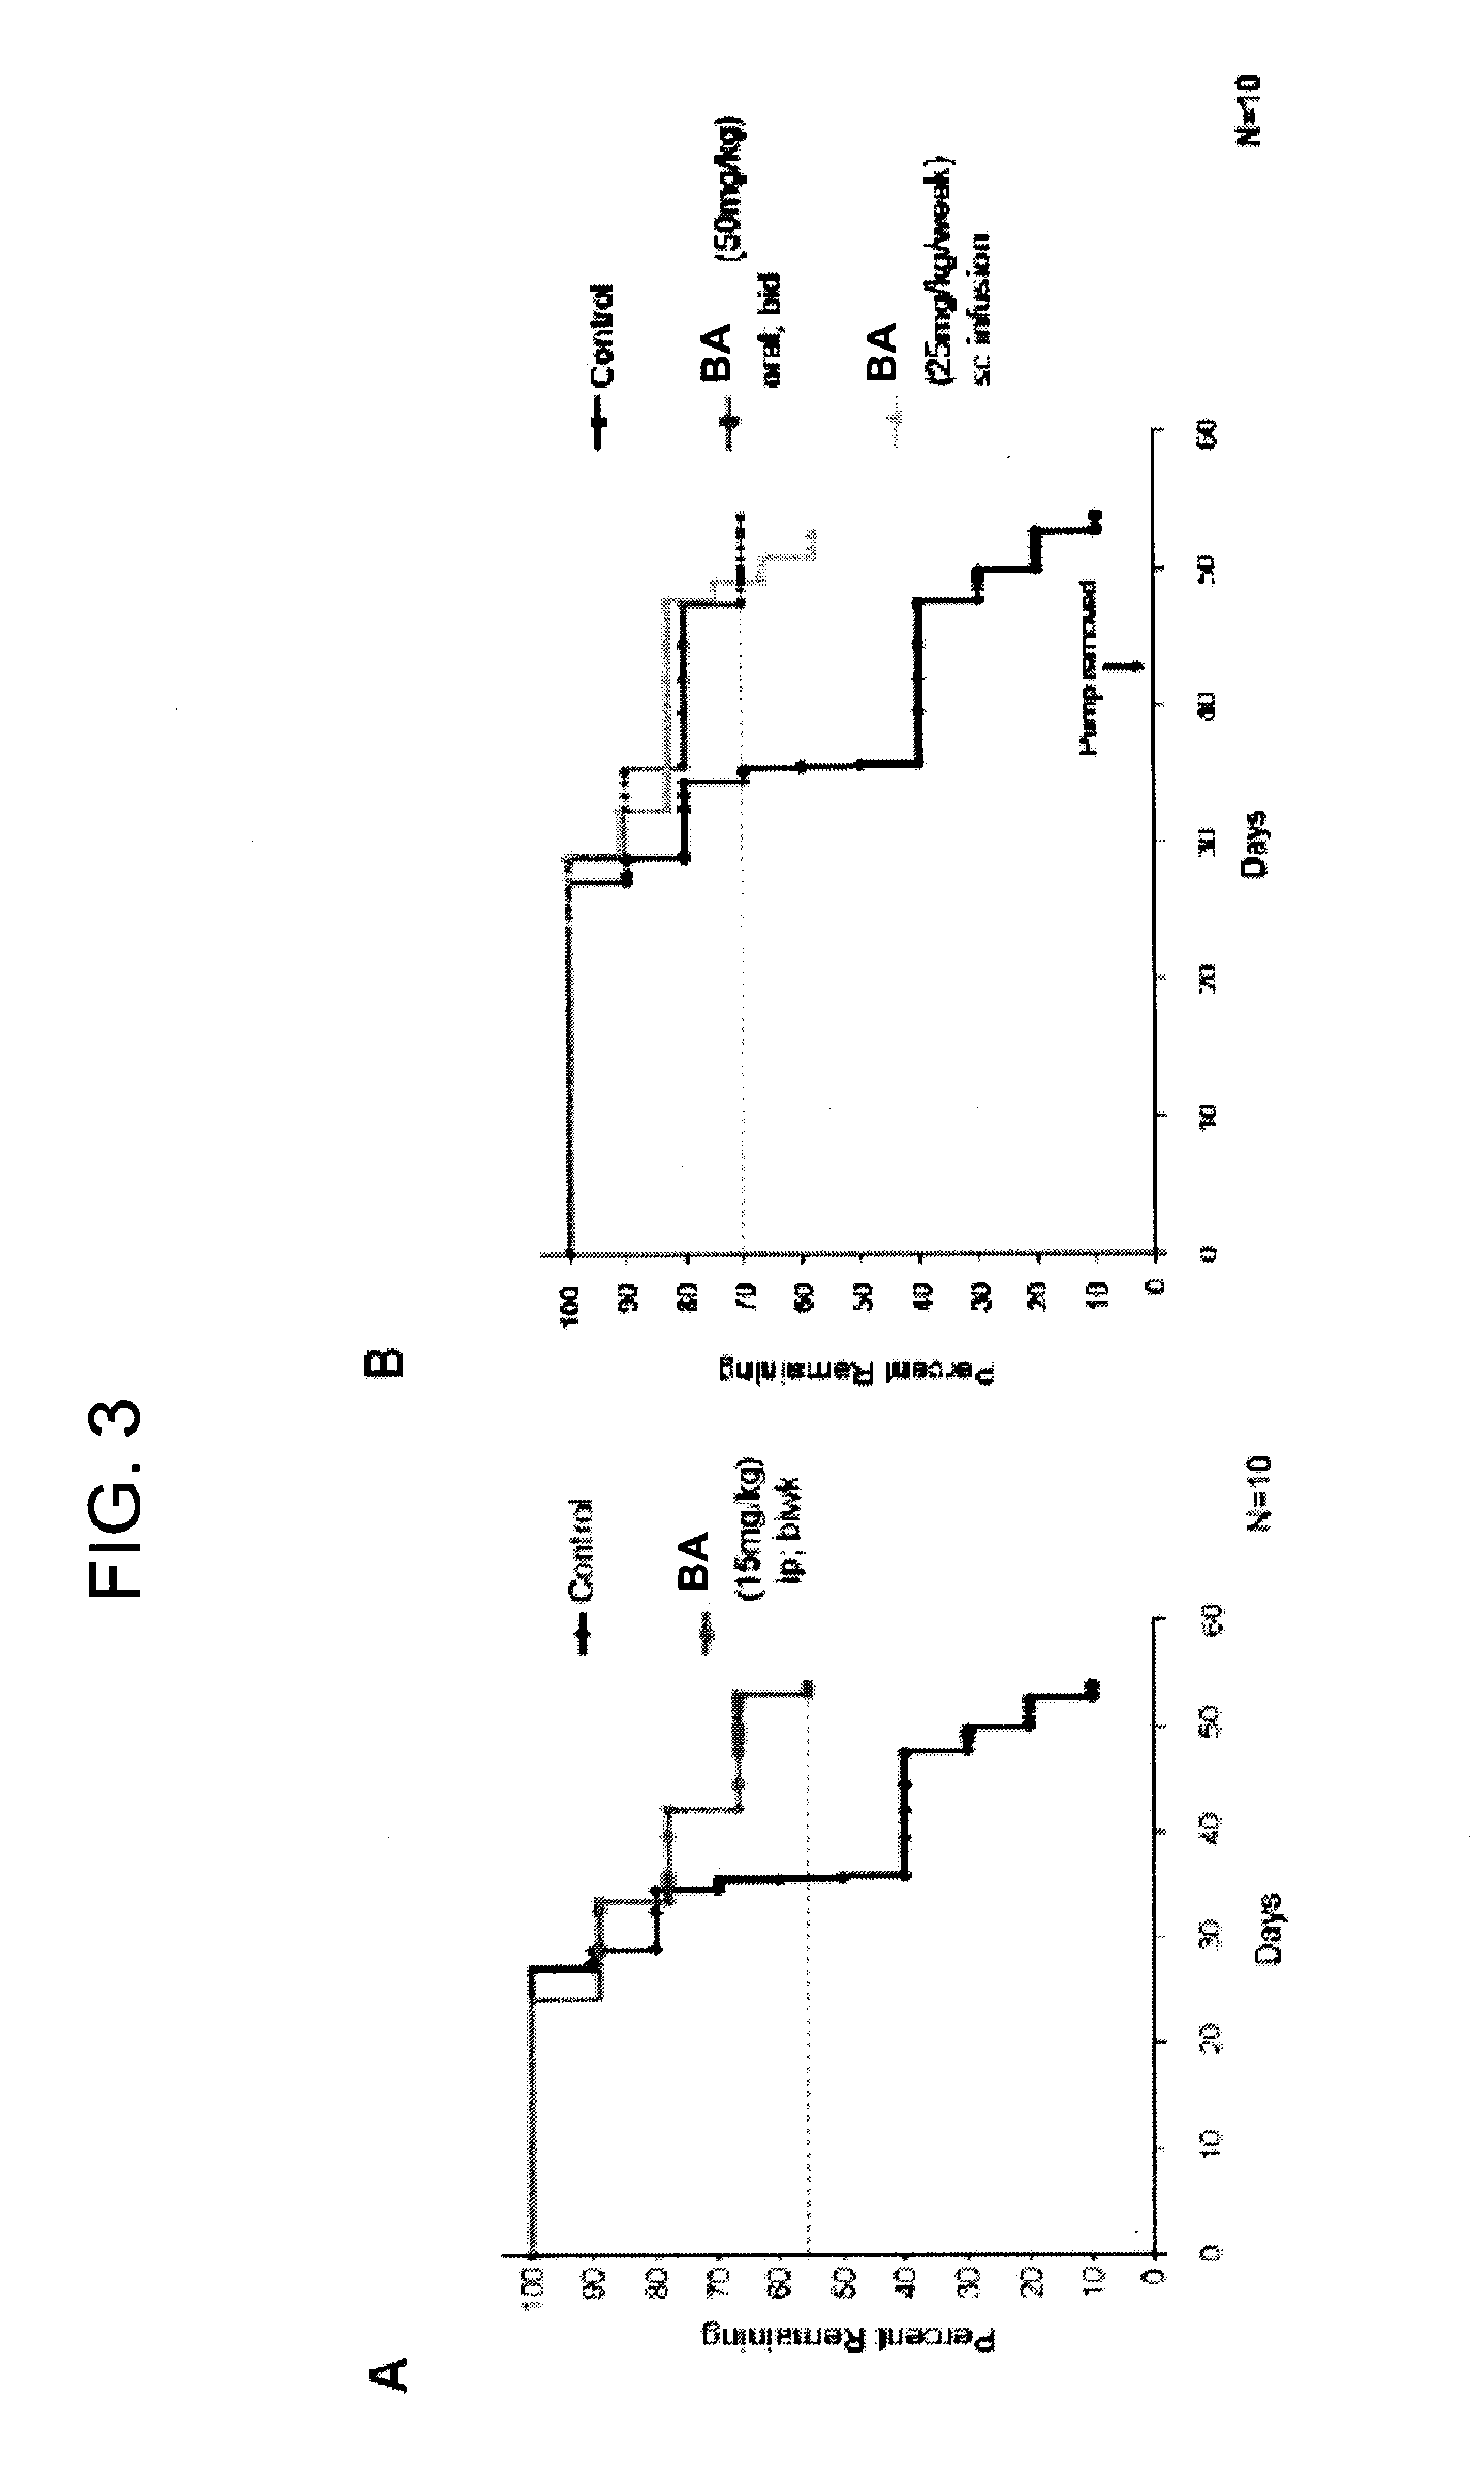 Treatment of uterine cancer and ovarian cancer with a parp inhibitor alone or in conbination with Anti-tumor agents